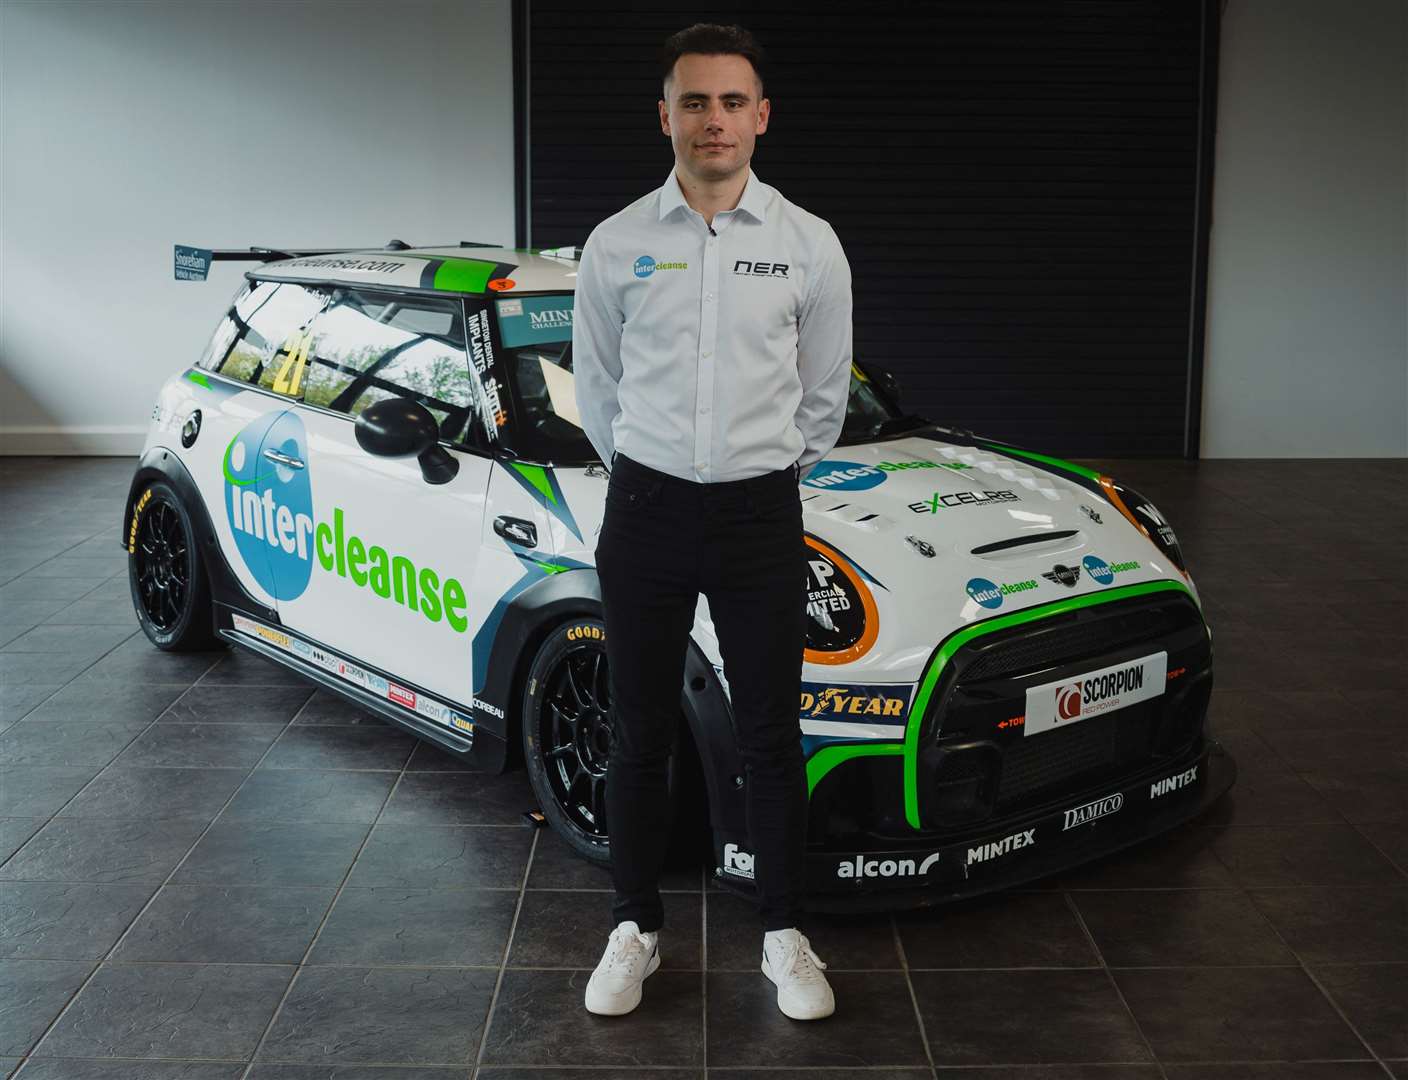 Tunbridge Wells' Nathan Edwards and the charger he hopes will bring success in this year's JCW category of the Vertu Mini Challenge